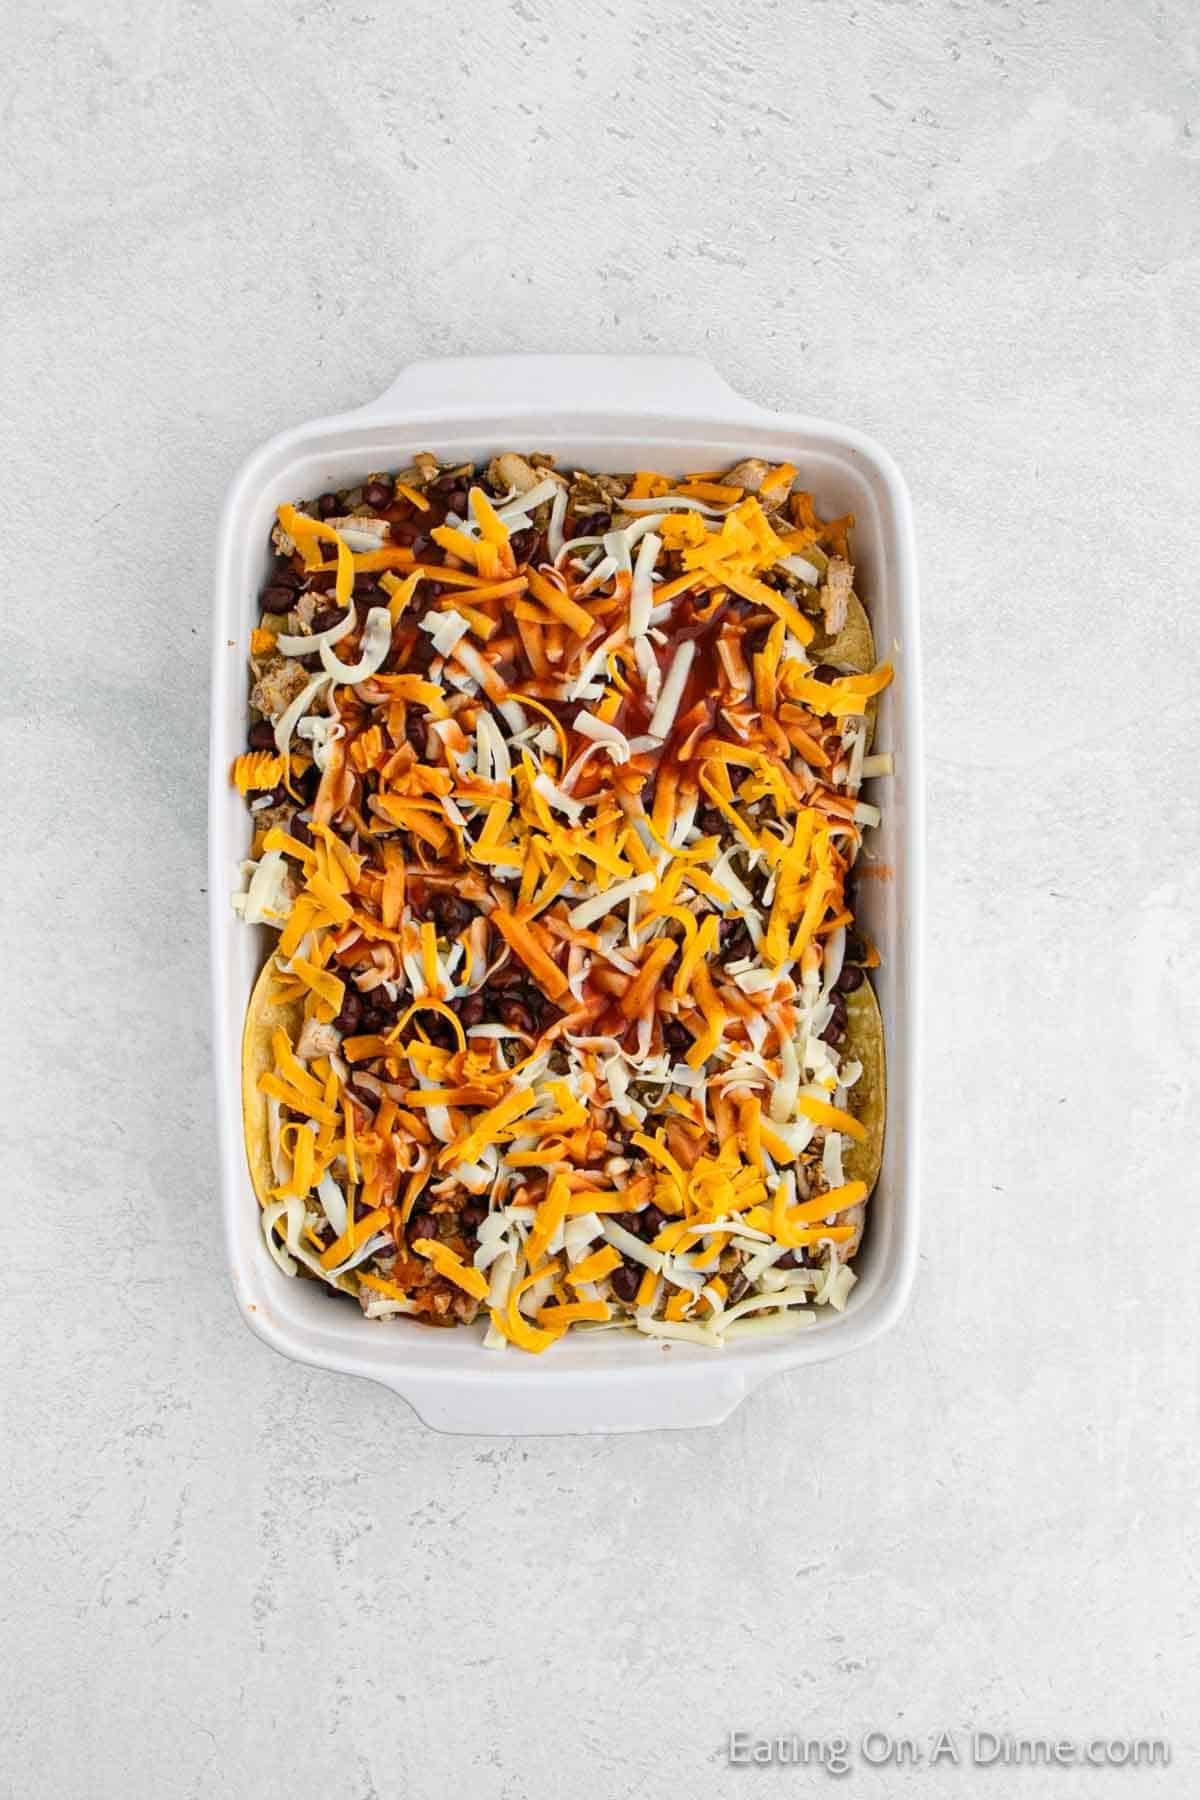 Topping with more shredded cheese